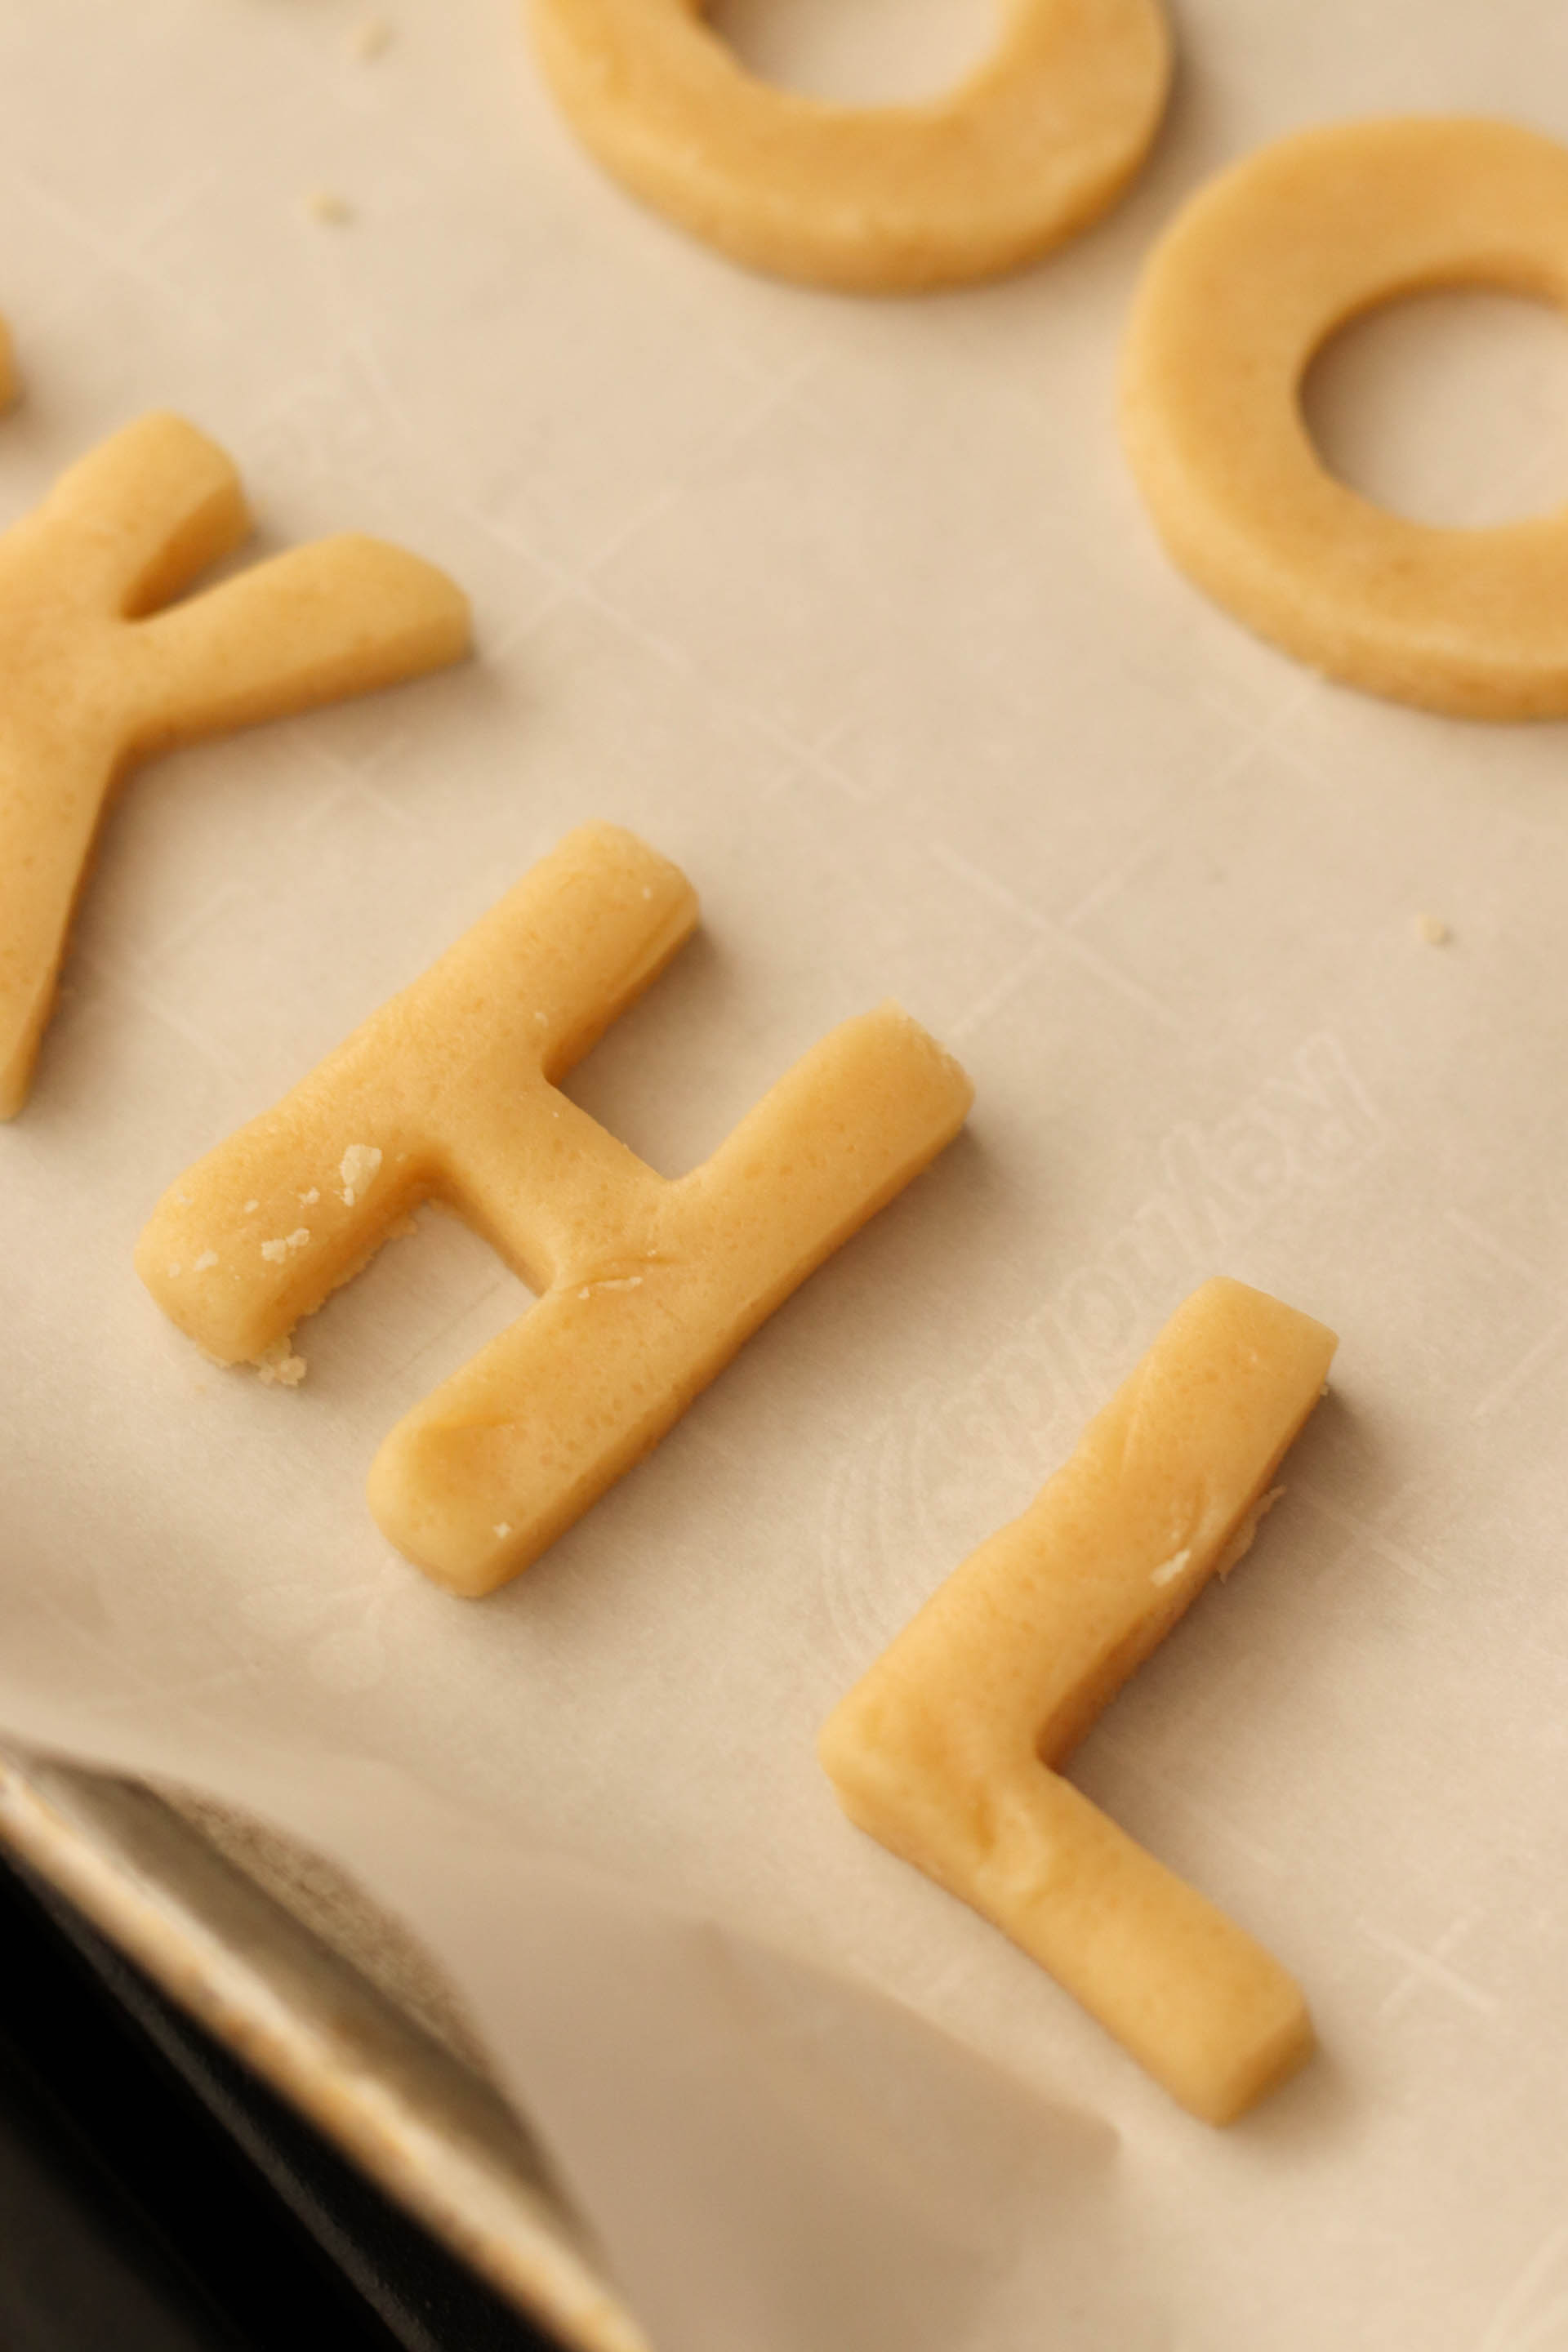 Unbaked Back-to-School Alphabet Sugar Cookies on baking sheet